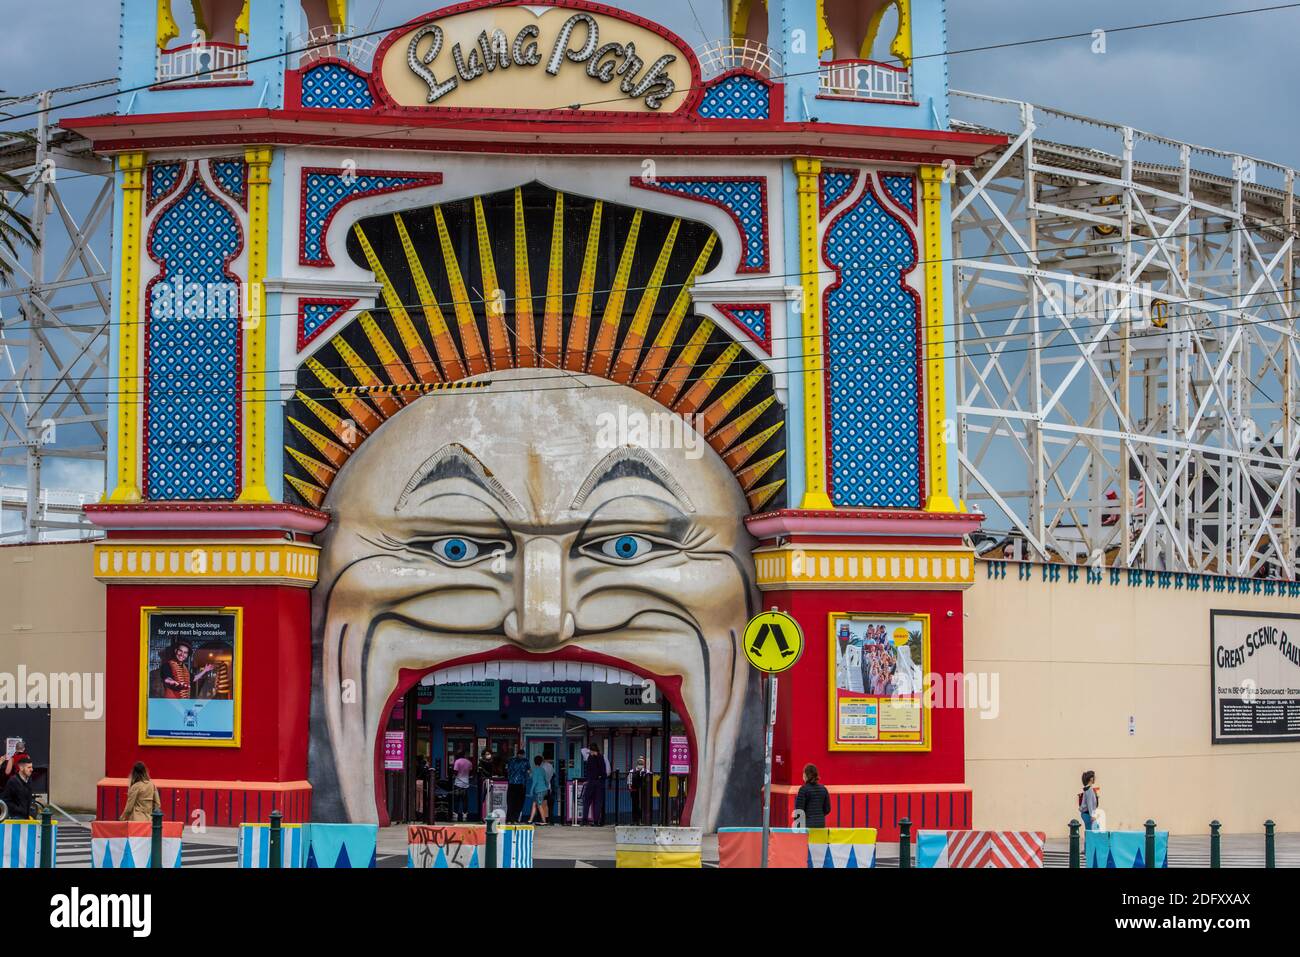 melbourne-australia-06th-dec-2020-front-entrance-with-qr-code-registration-temperature-check-and-ticket-booth-at-the-luna-parkmelbournes-iconic-outdoor-entertainment-venue-luna-park-opened-its-doors-to-visitors-.jpg